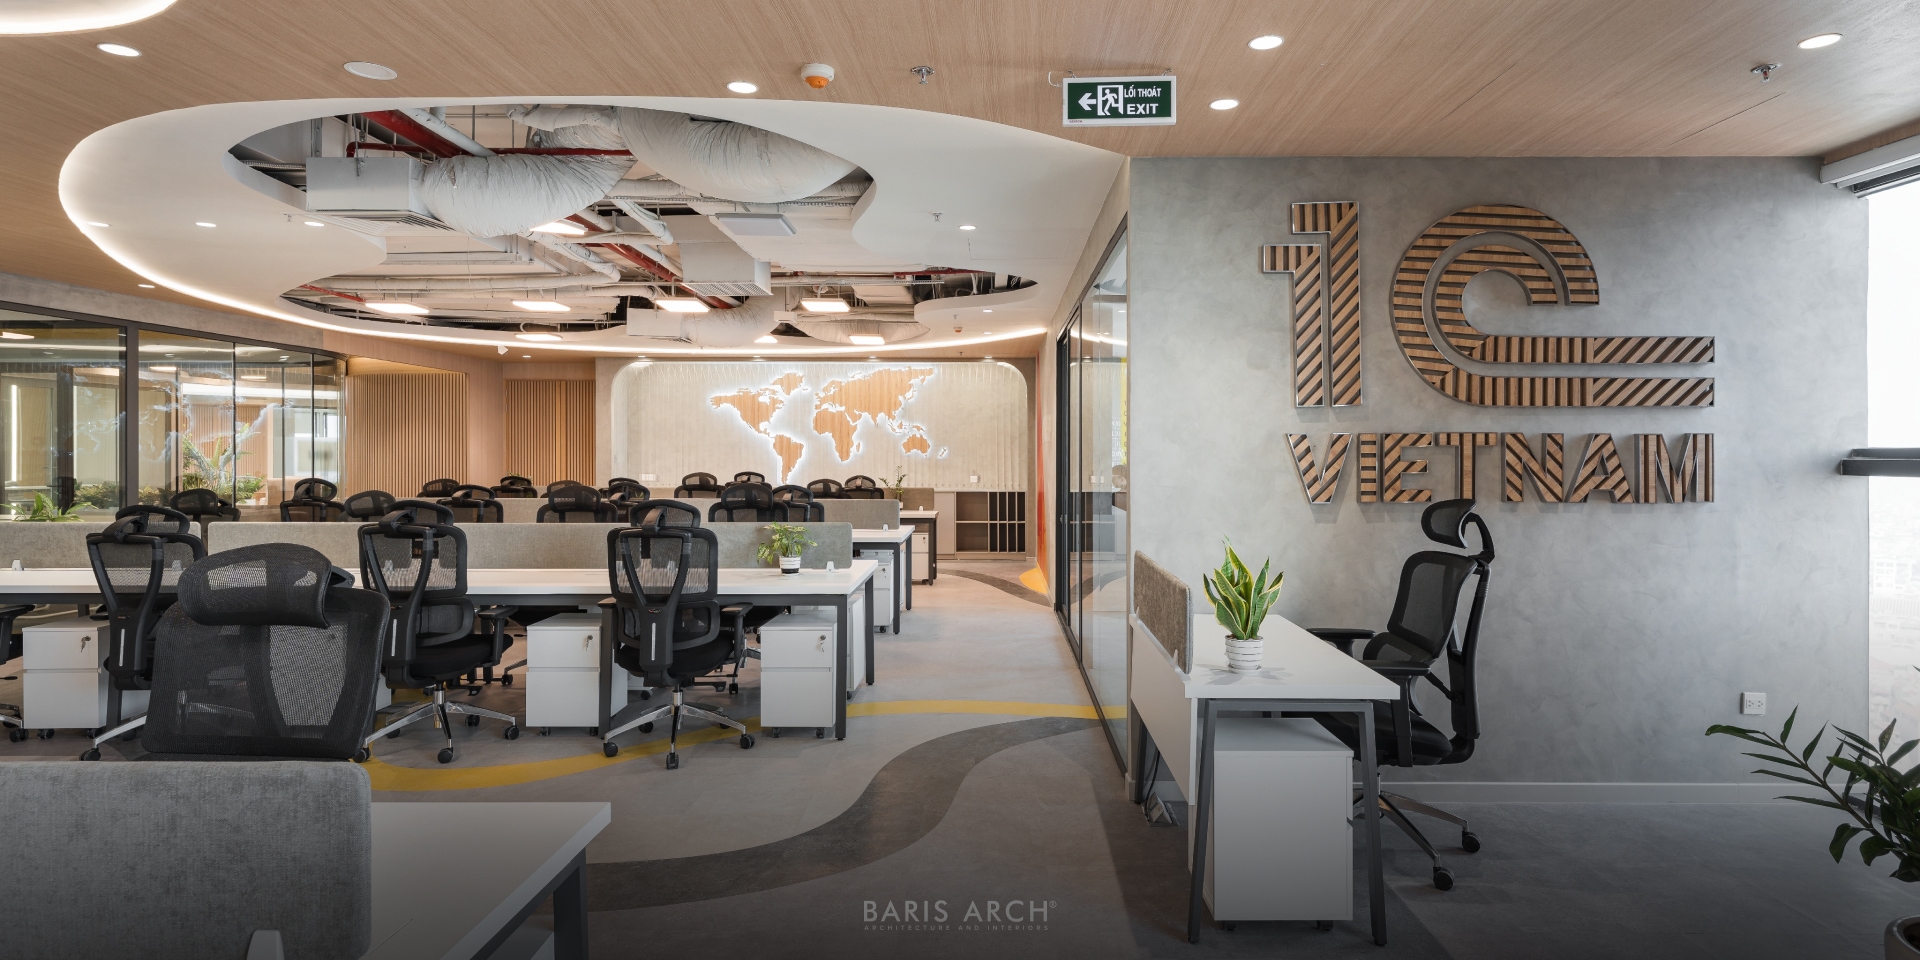 1C OFFICE | MODERN TECHNOLOGICAL OFFICE SPACE WITH AIMS OF SUSTAINABLE DEVELOPMENT